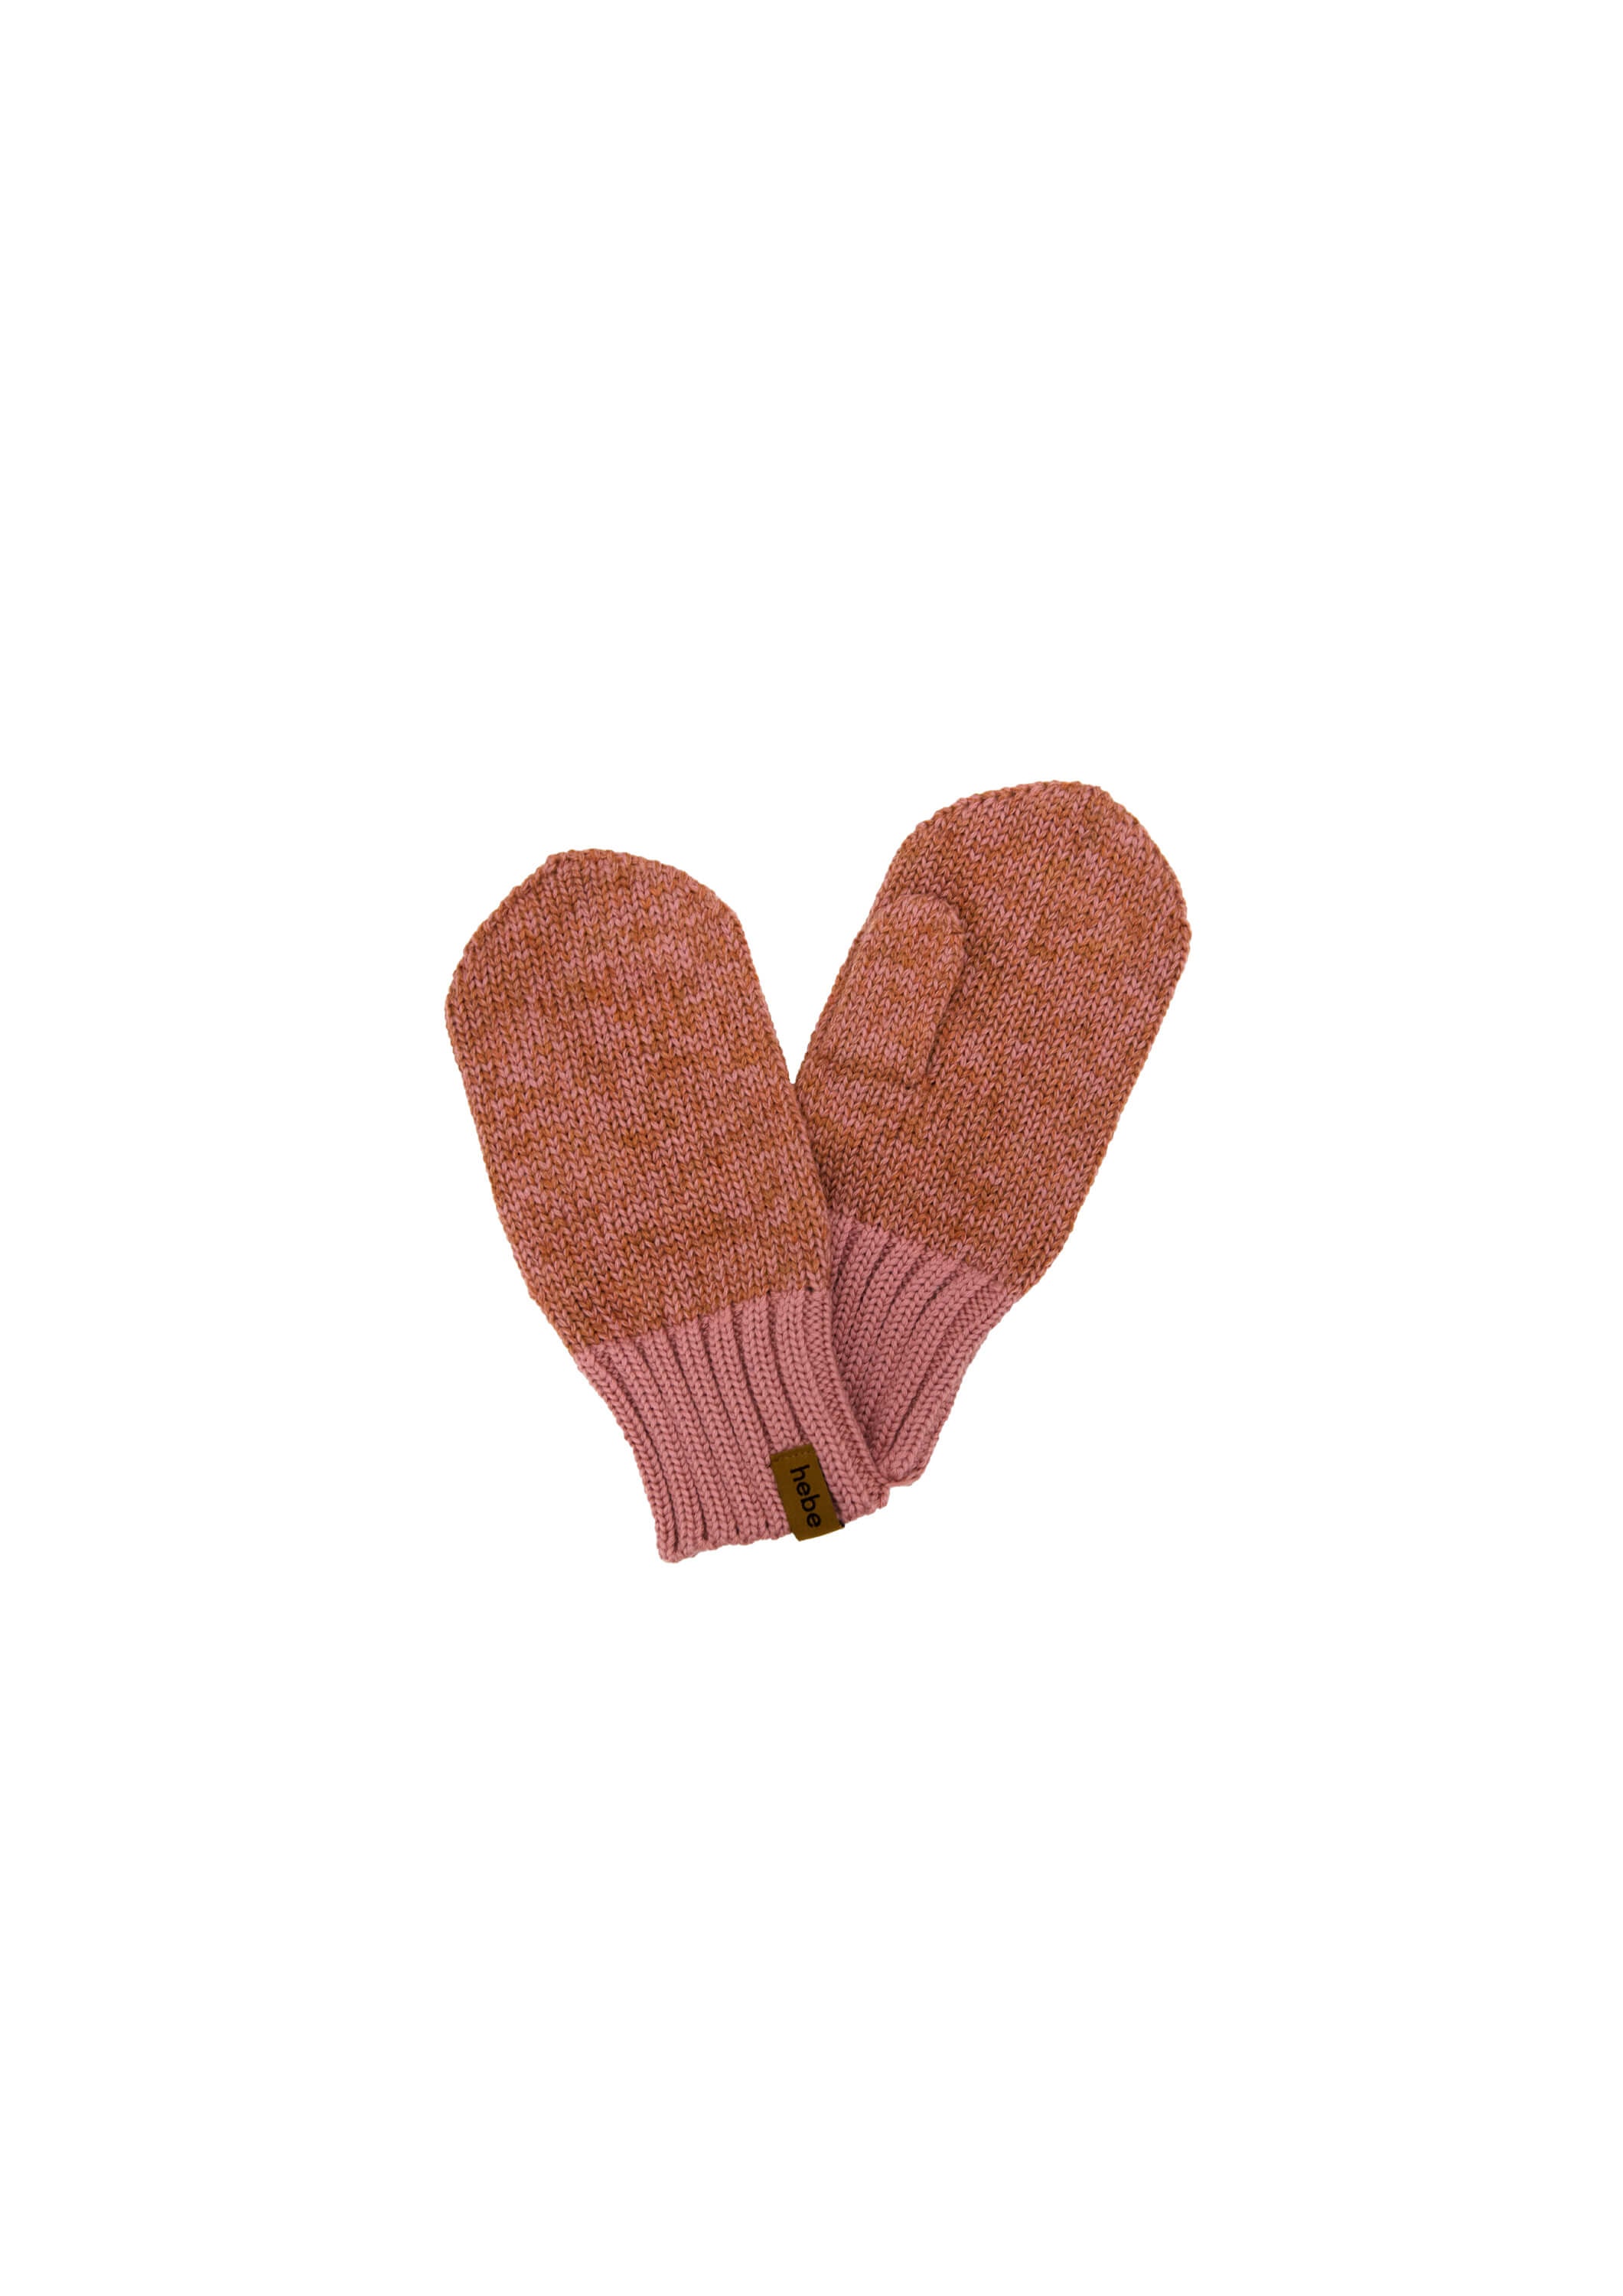 Shop pink Merino wool kids' mittens, which are the perfect winter essentials to keep your child warm during colder weather, online in Hong Kong and Singapore at MiliMilu. Made from soft and breathable merino wool, these mittens will become your child's and even tweens' favourite winter item. The best kids gifts.